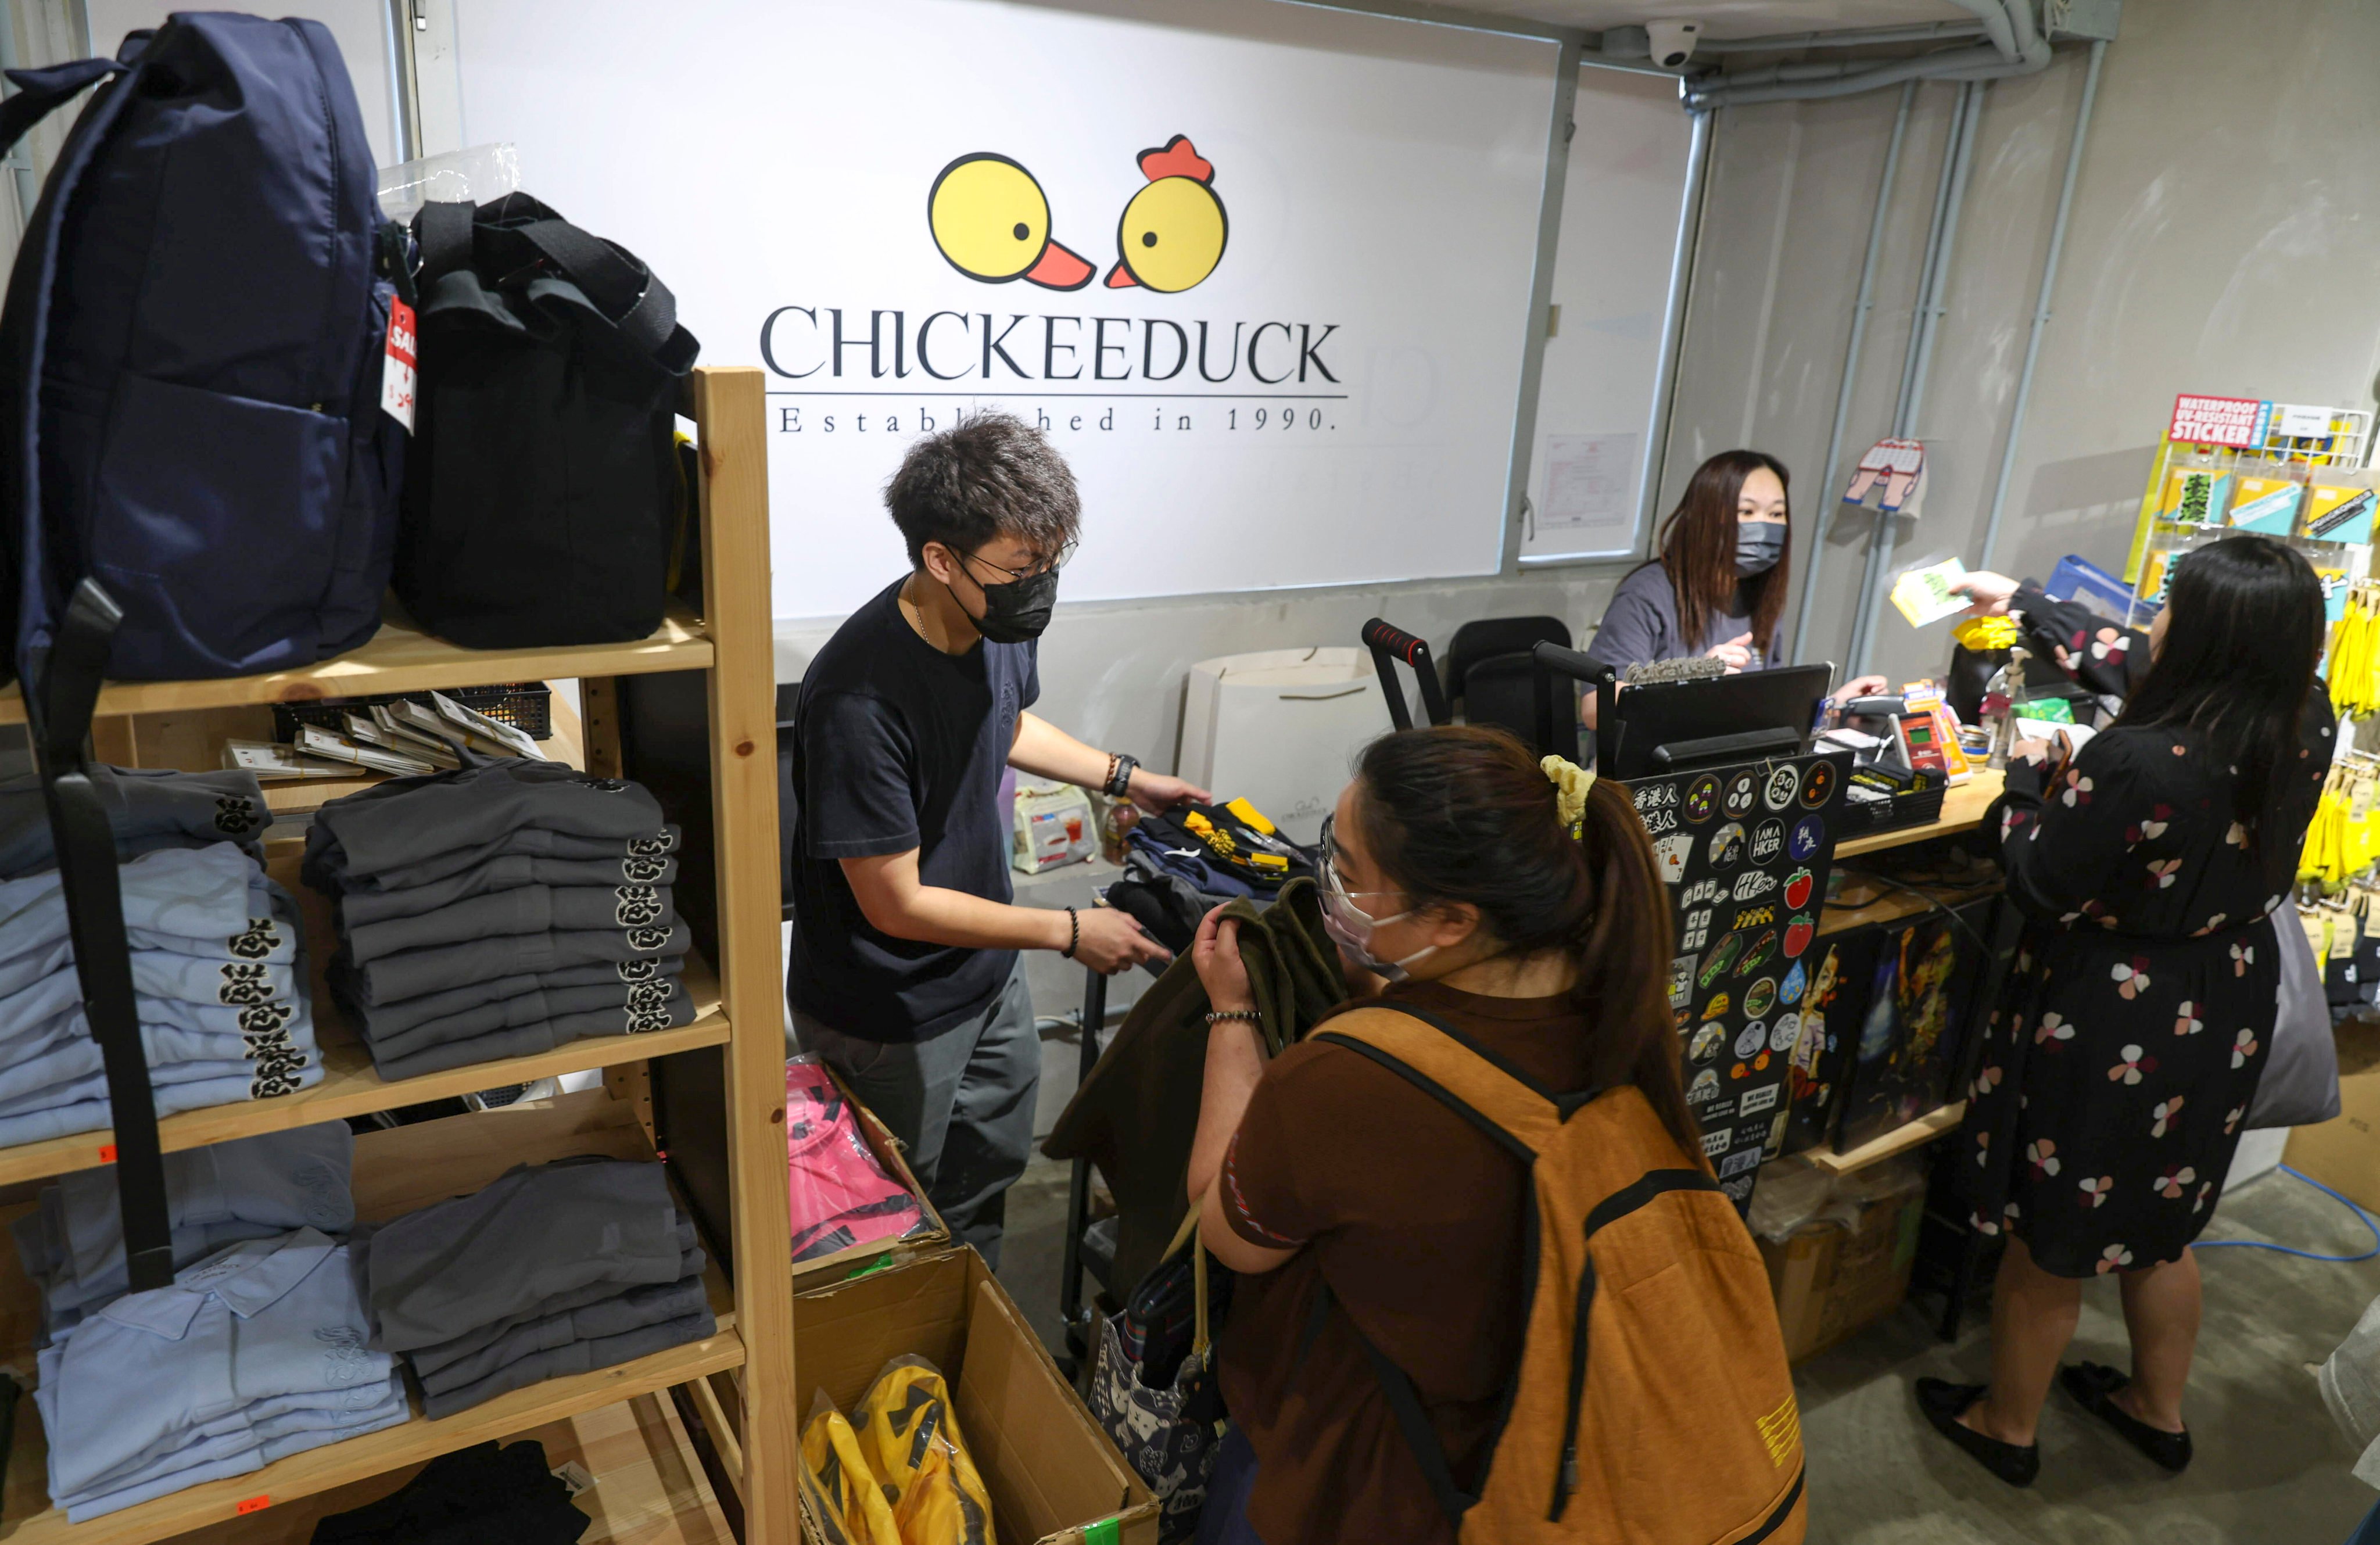 Customers at the Chickeeduck store in Causeway Bay. Photo: Yik Yeung-man